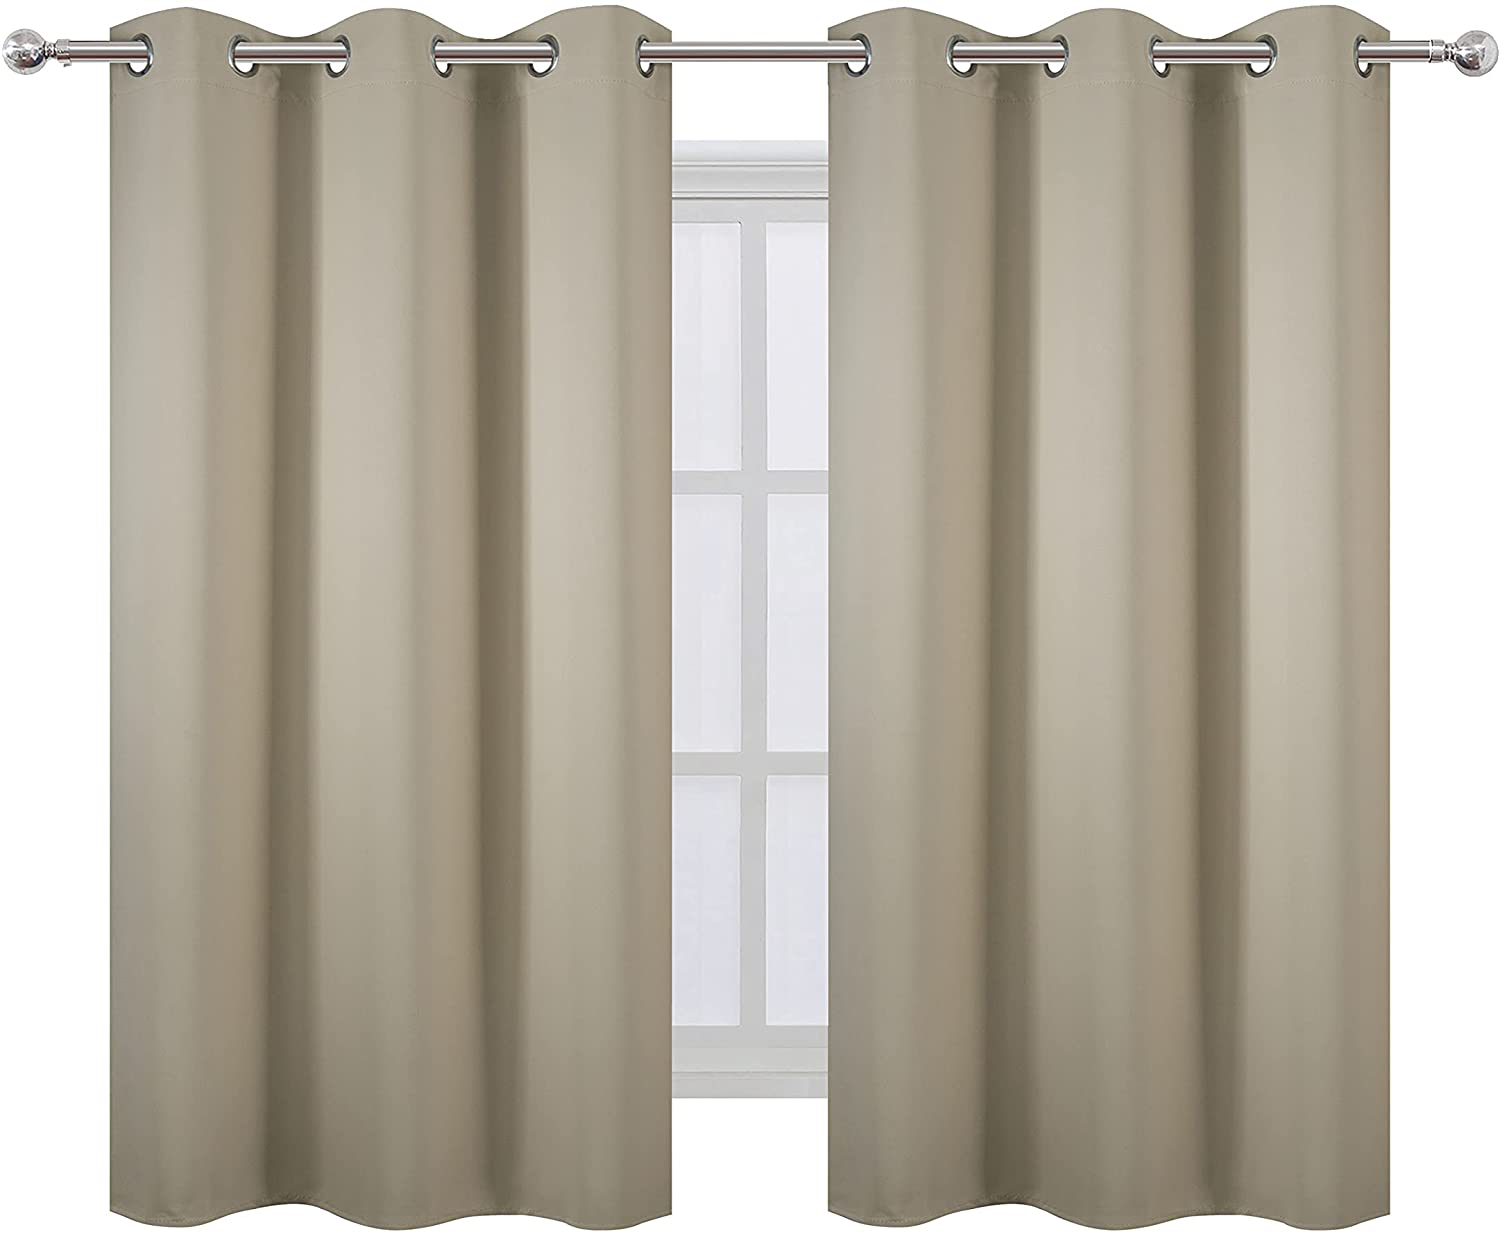 LEMOMO Navy Blue Thermal Blackout Curtains/42 x 95 Inch/Set of 2 Panels Room Darkening Curtains for Bedroom